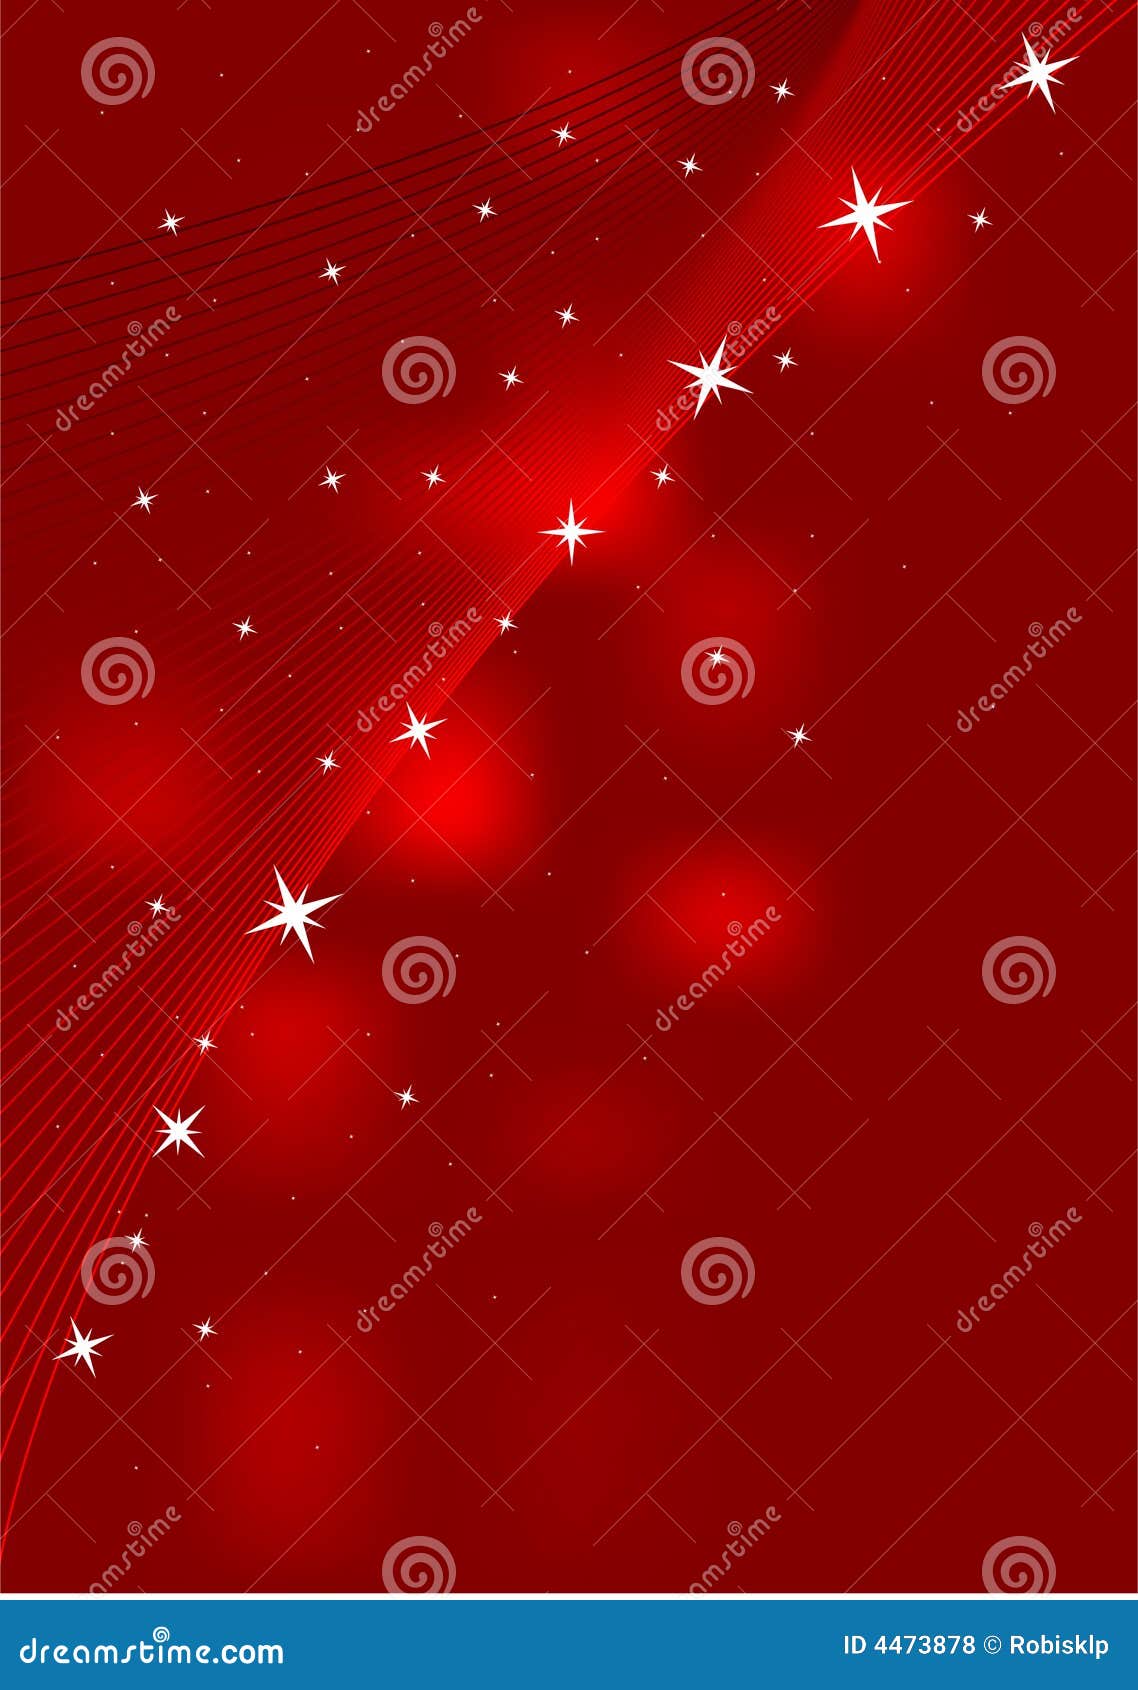 Red background with stars stock vector. Illustration of digital - 4473878